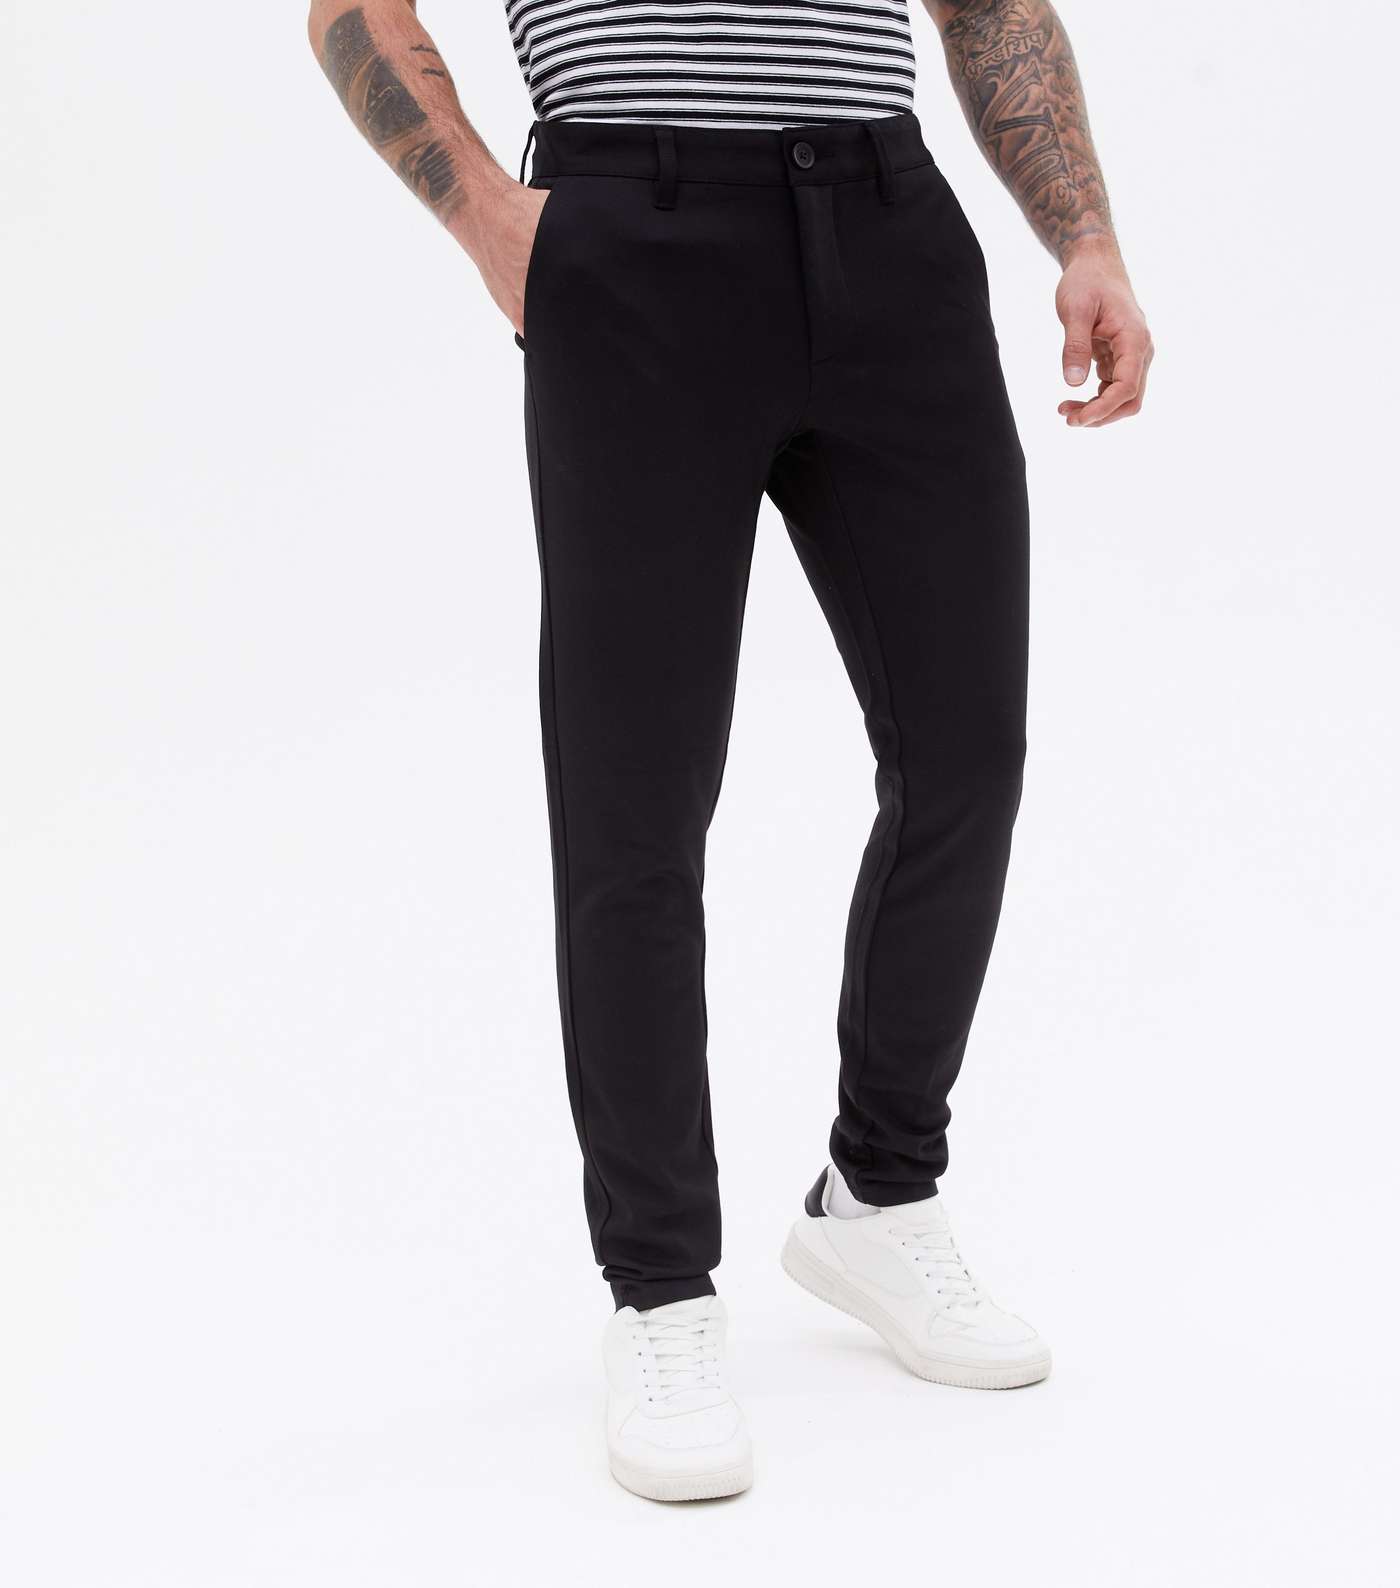 Only & Sons Black Slim Fit Tapered Trousers Image 2